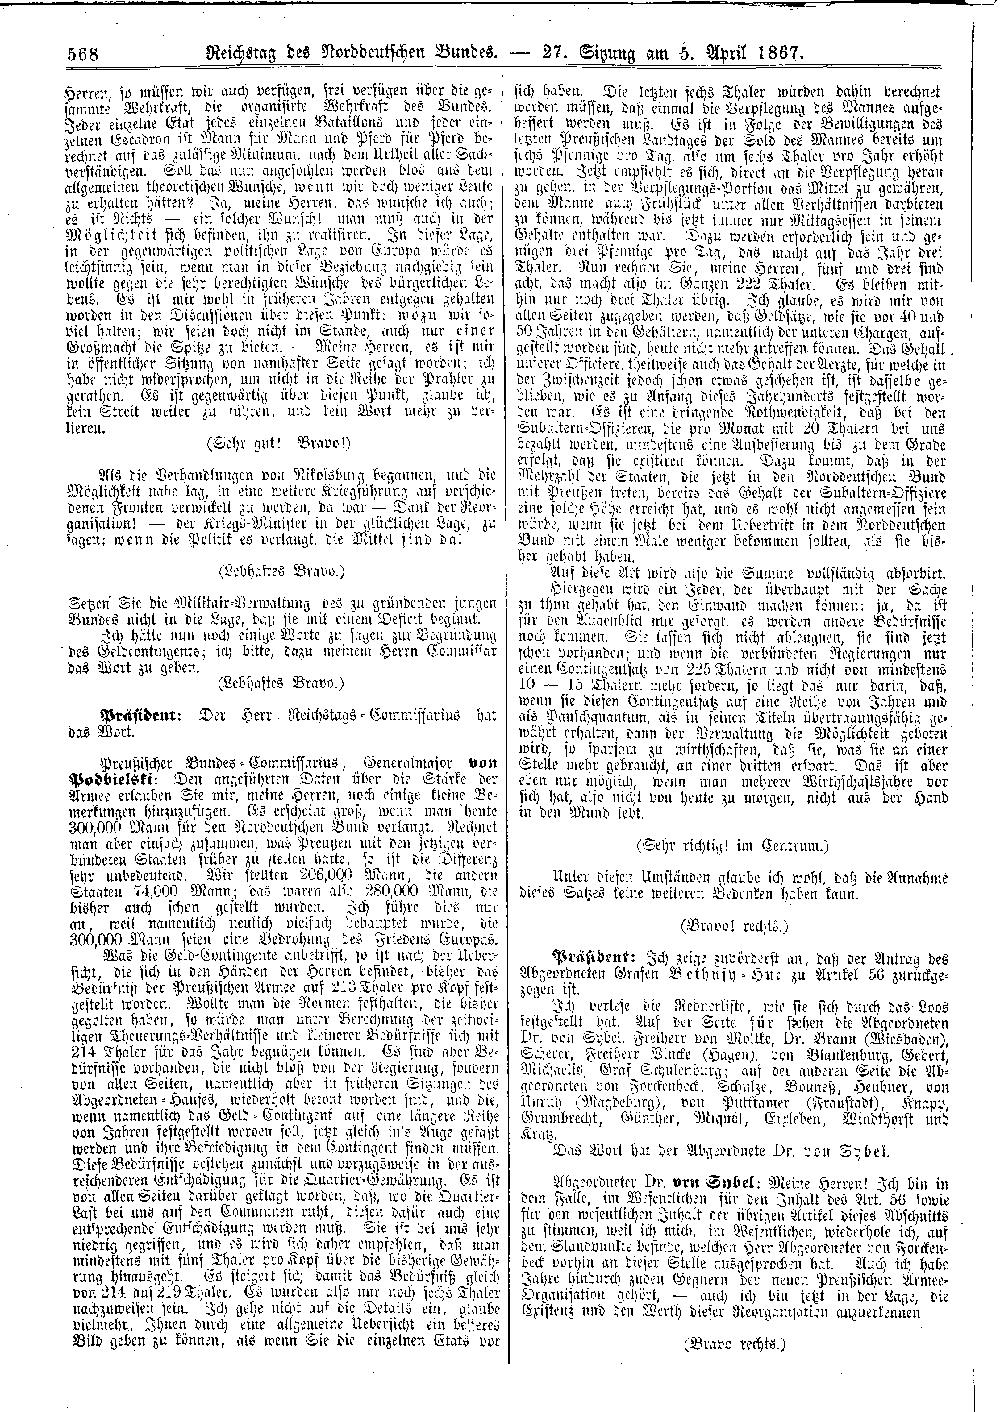 Scan of page 568